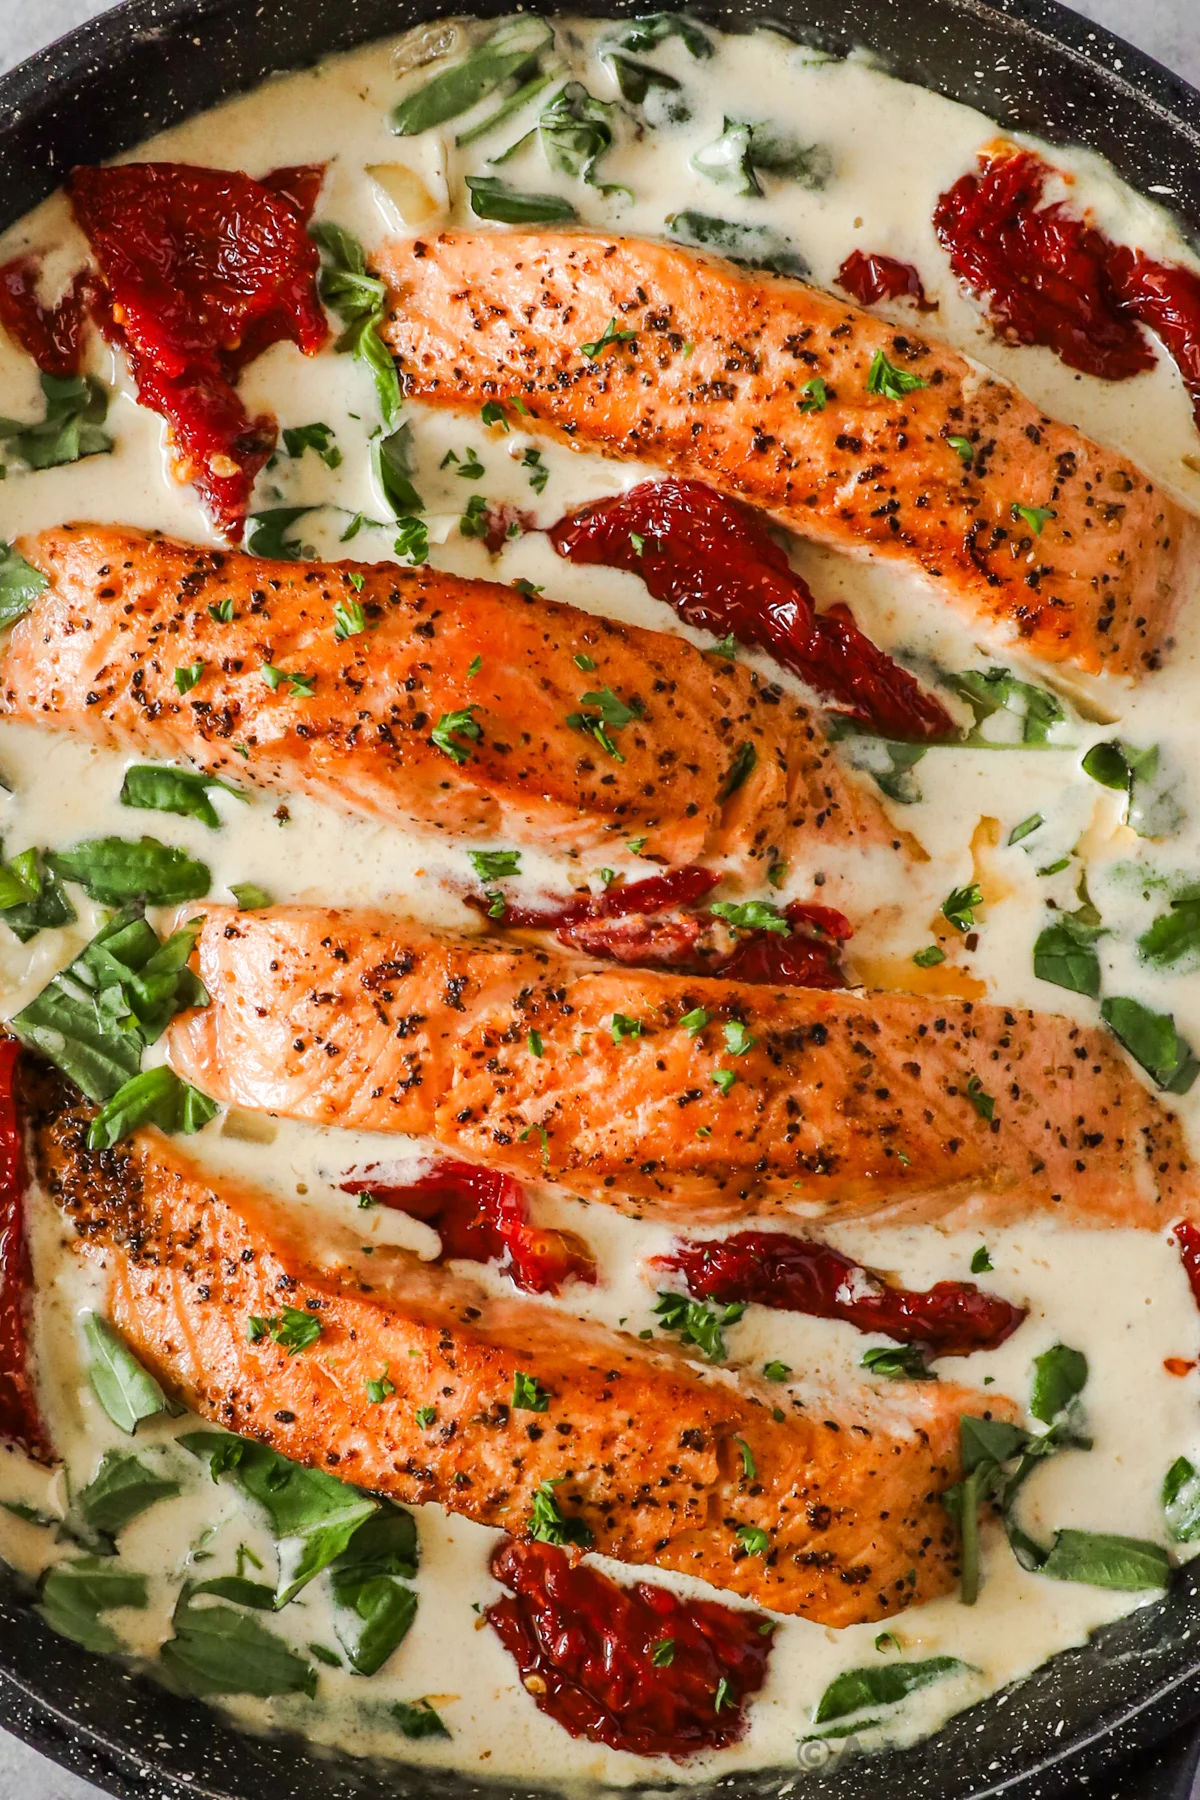 Close up of salmon fillets with sun dried tomatoes and spinach in a creamy sauce.